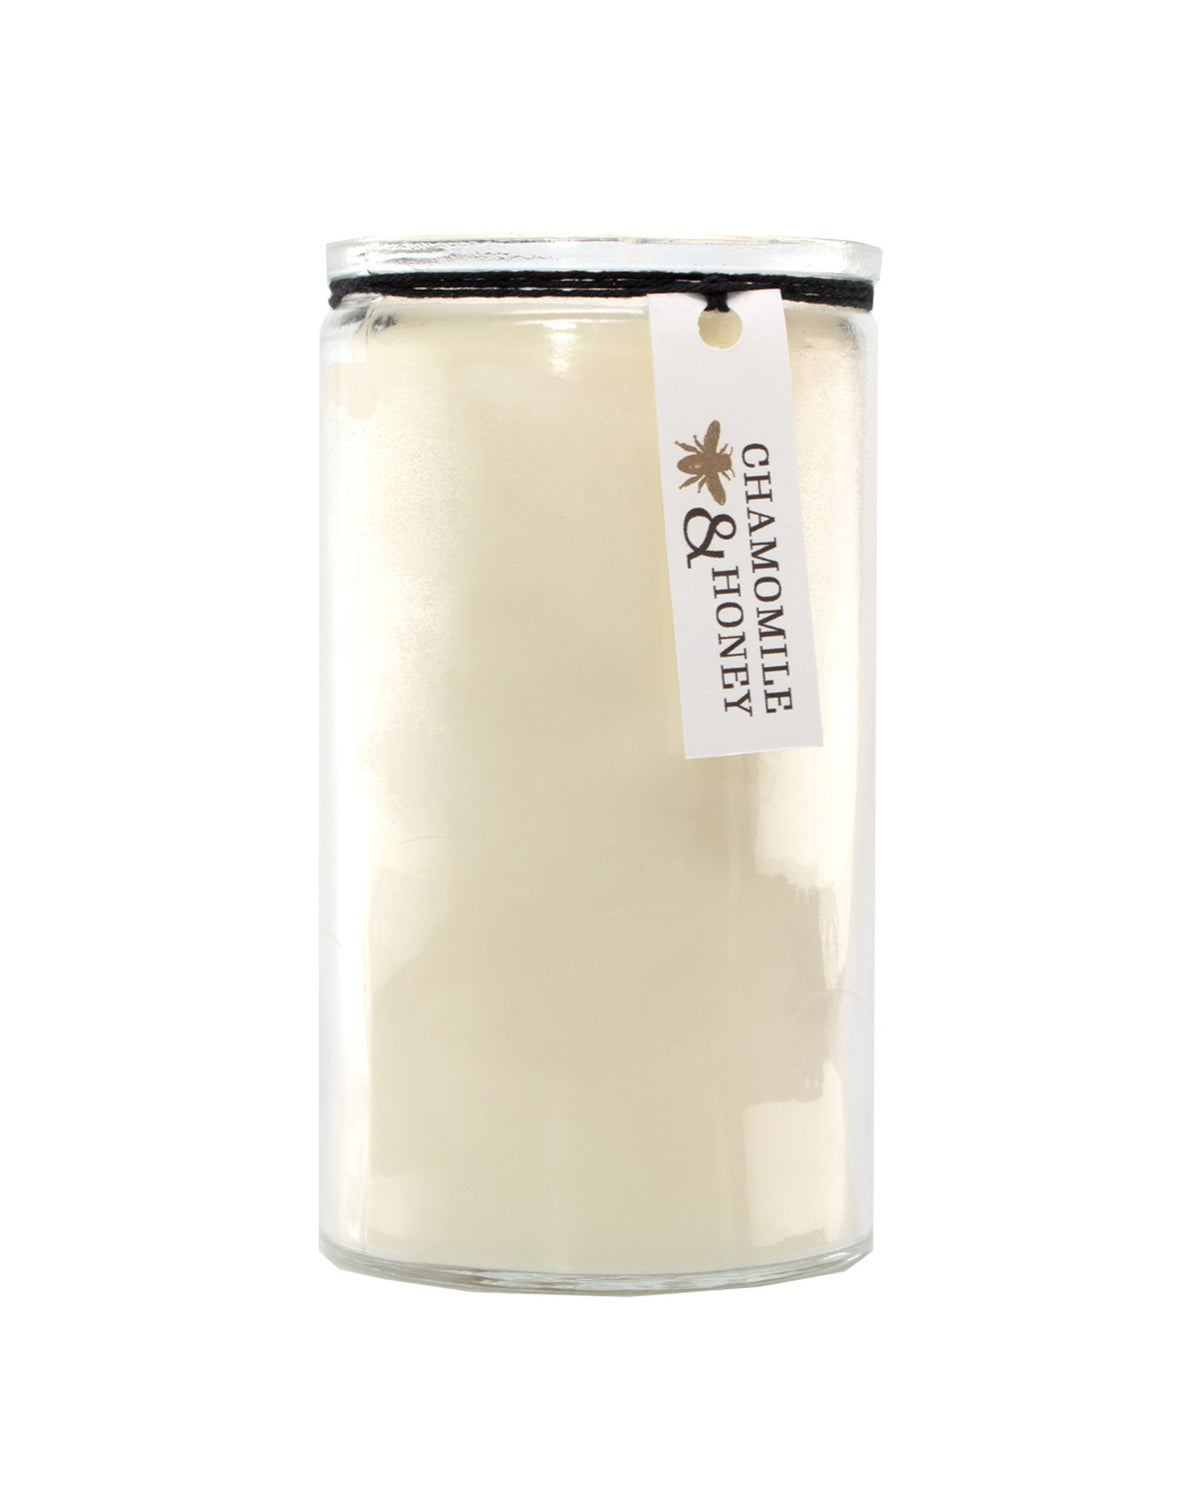 A large U.S. Apothecary Chamomile & Honey Candle in a clear glass jar with a beige label featuring the text "chamomile & honey" attached by a brown string. The candle wax is made of soy vegetable wax.